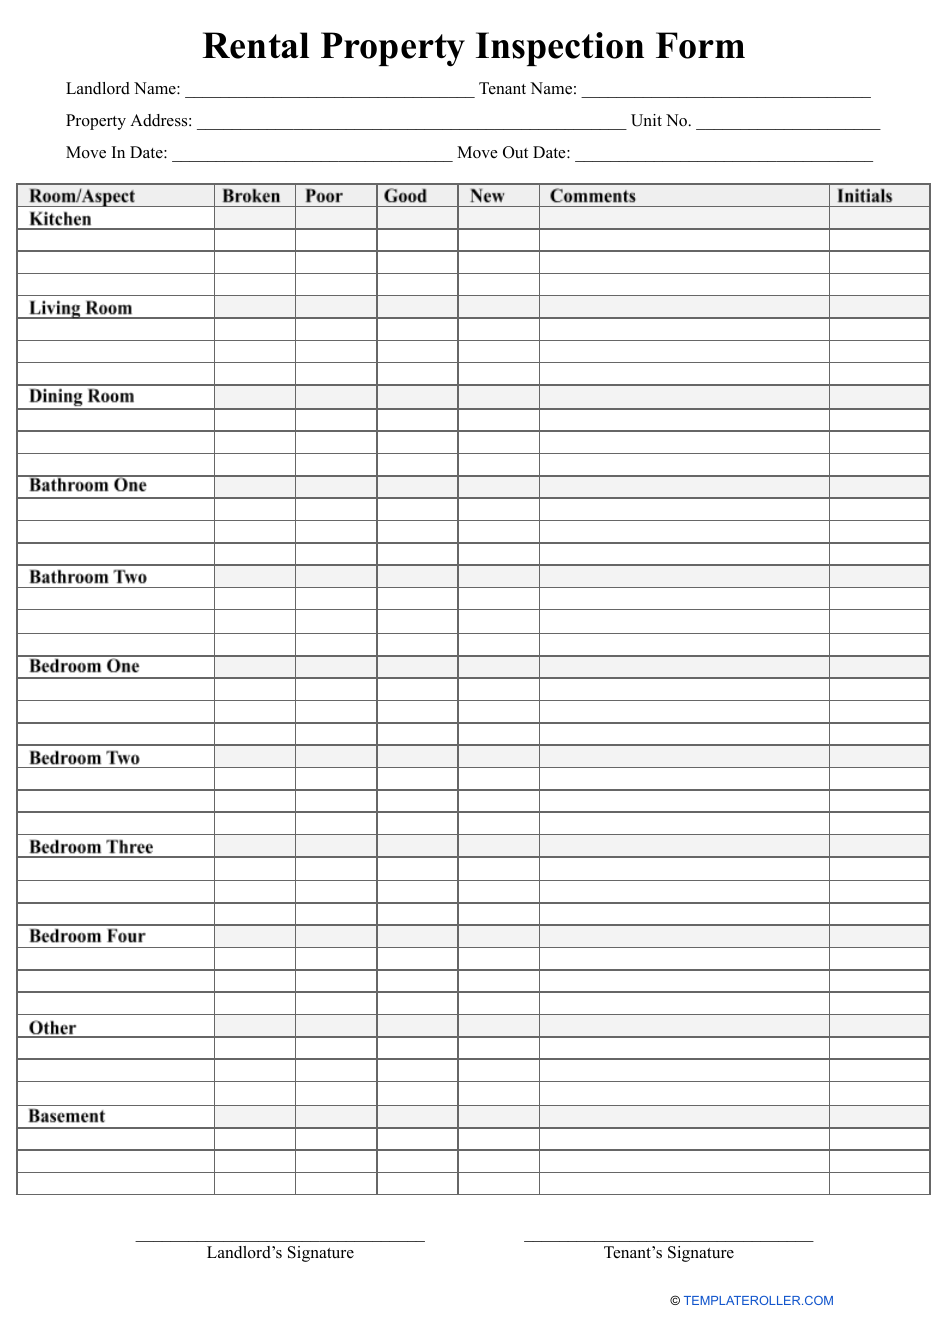 Rental Property Inspection Form Download Printable PDF Pertaining To Home Inspection Report Template Pdf